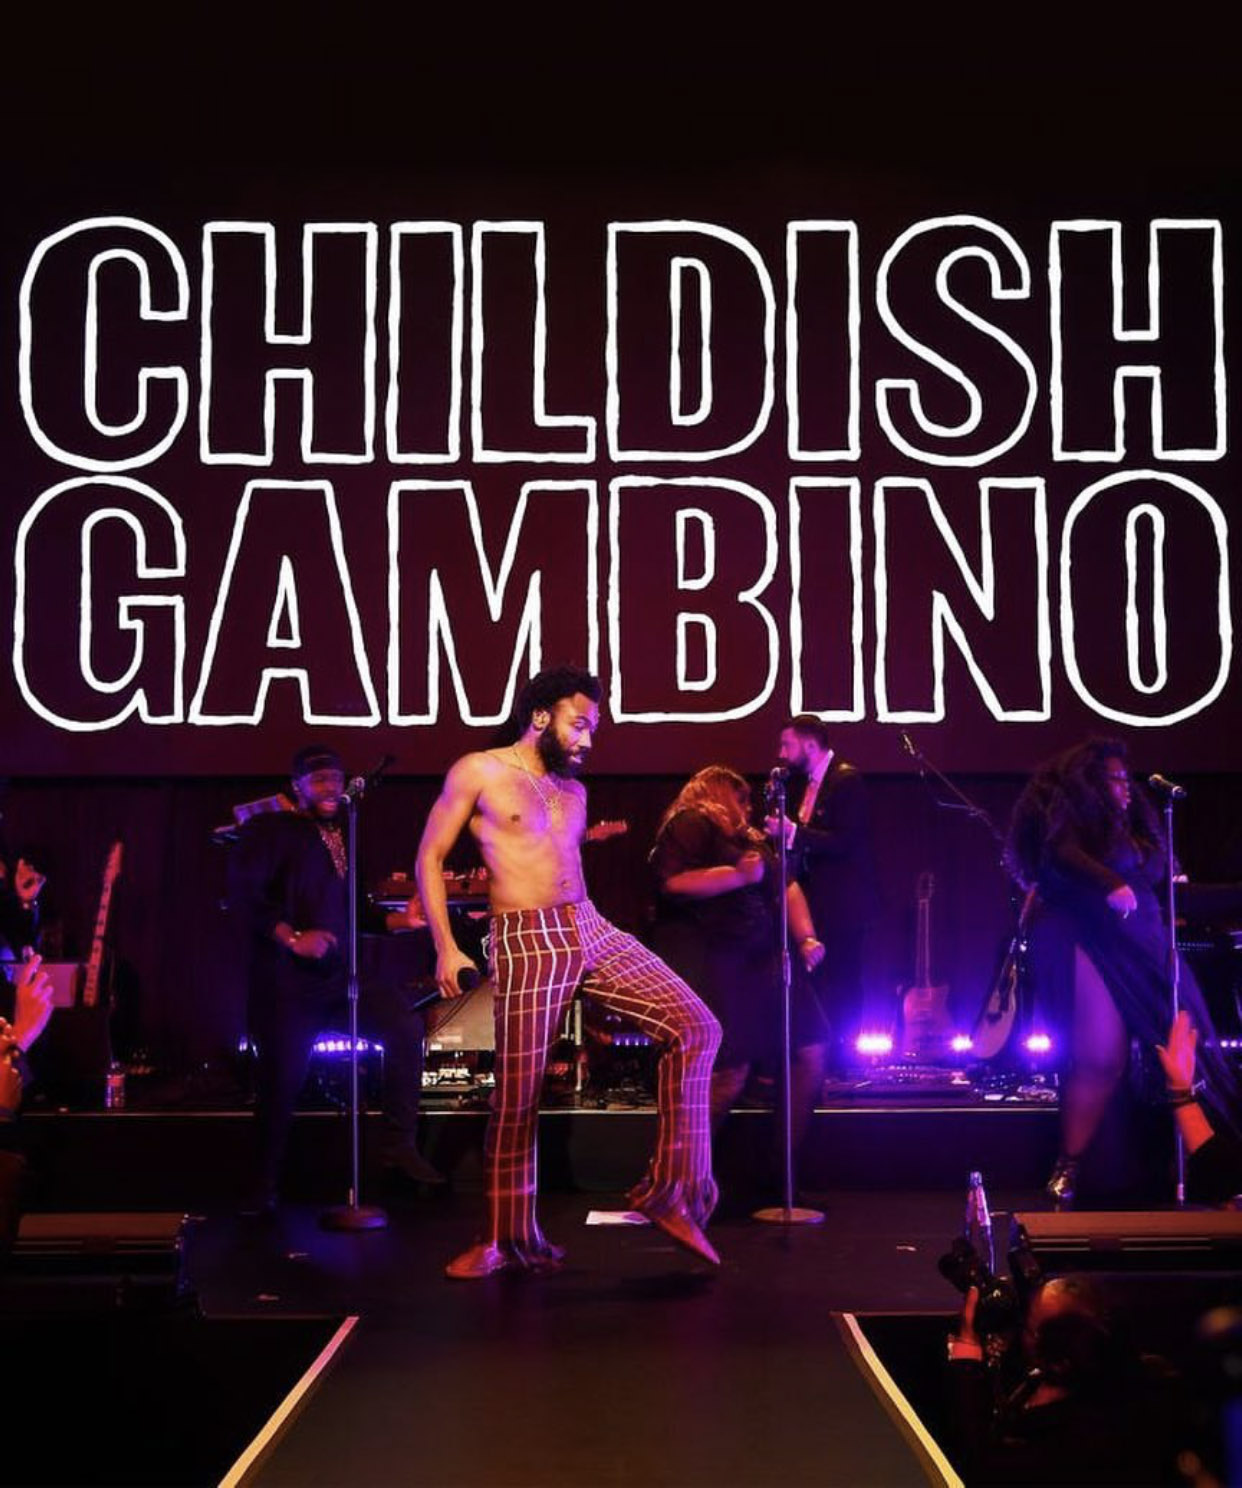 Childish Gambino on stage, below stylised lettering of his name 